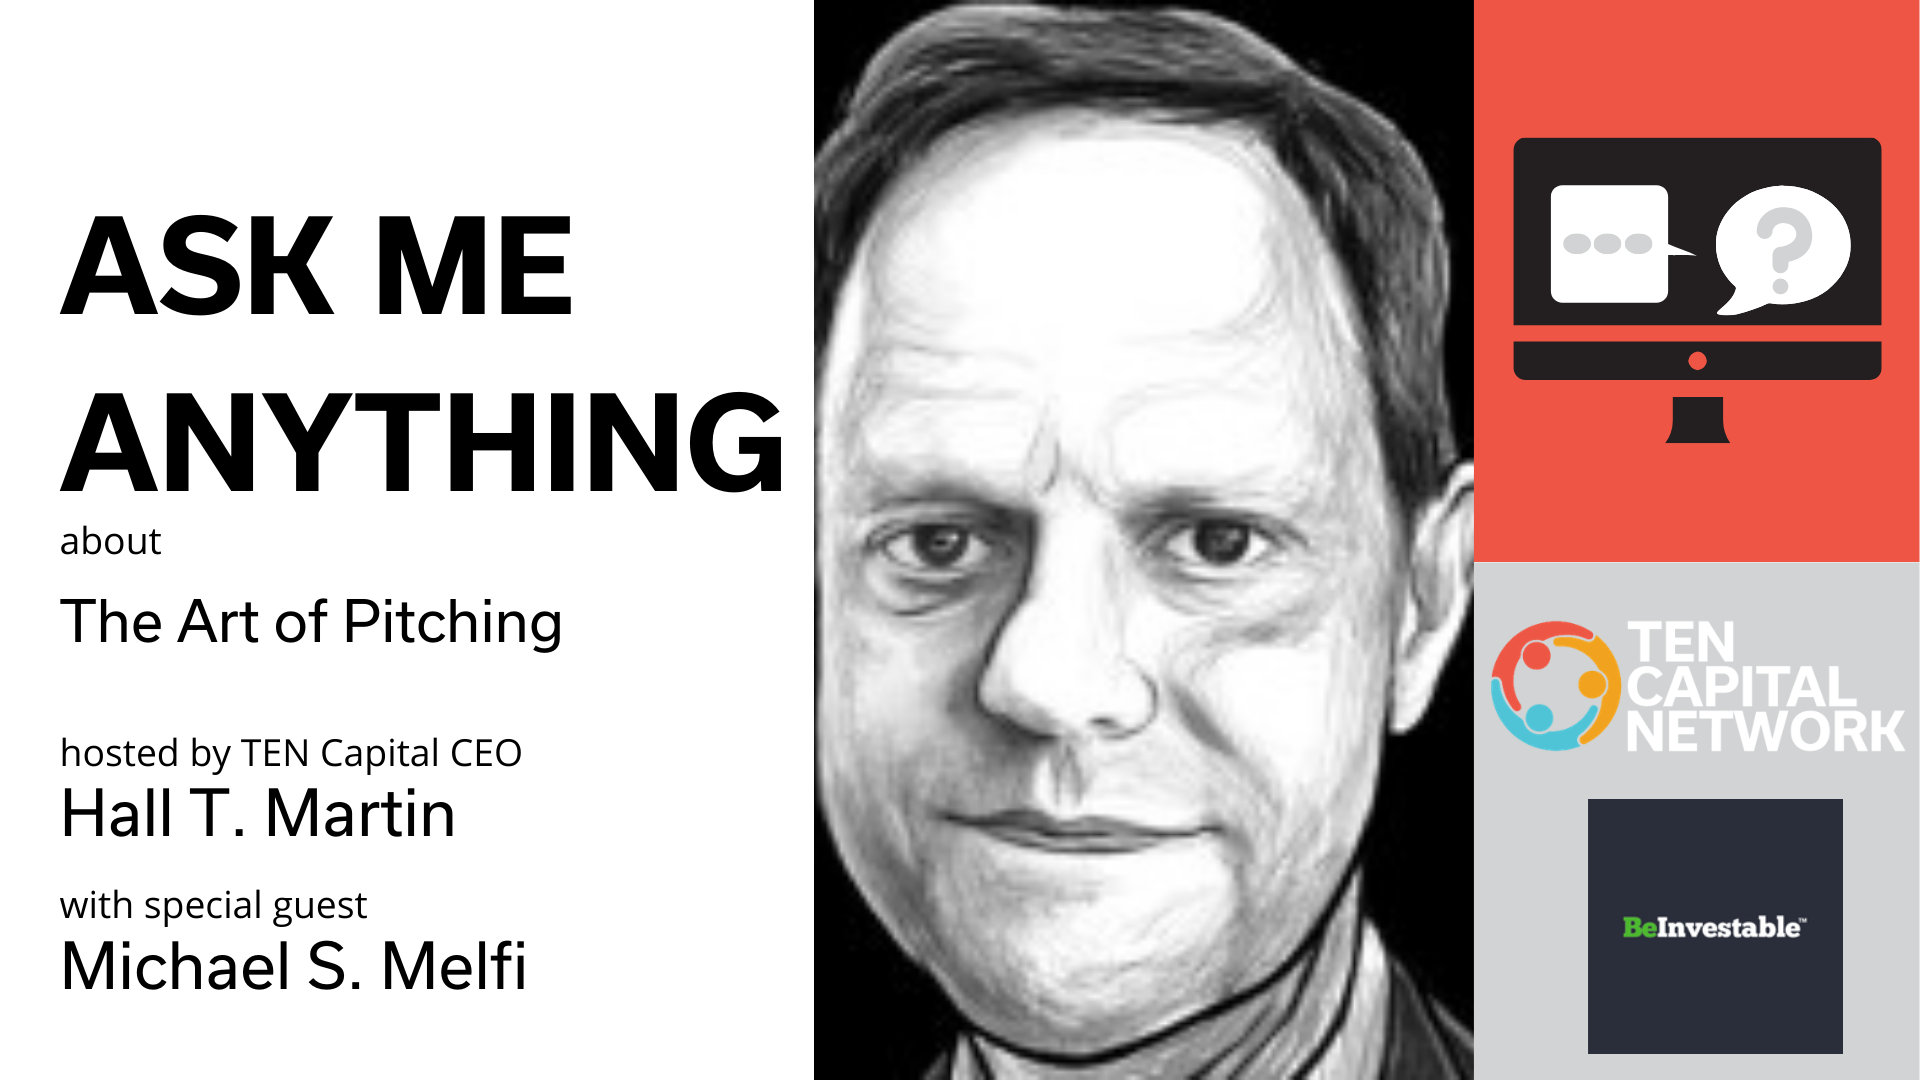 TEN Capital Presents: "Ask Me Anything"...  about The Art of Pitching, with special guest Michael Melfi of Be Investable